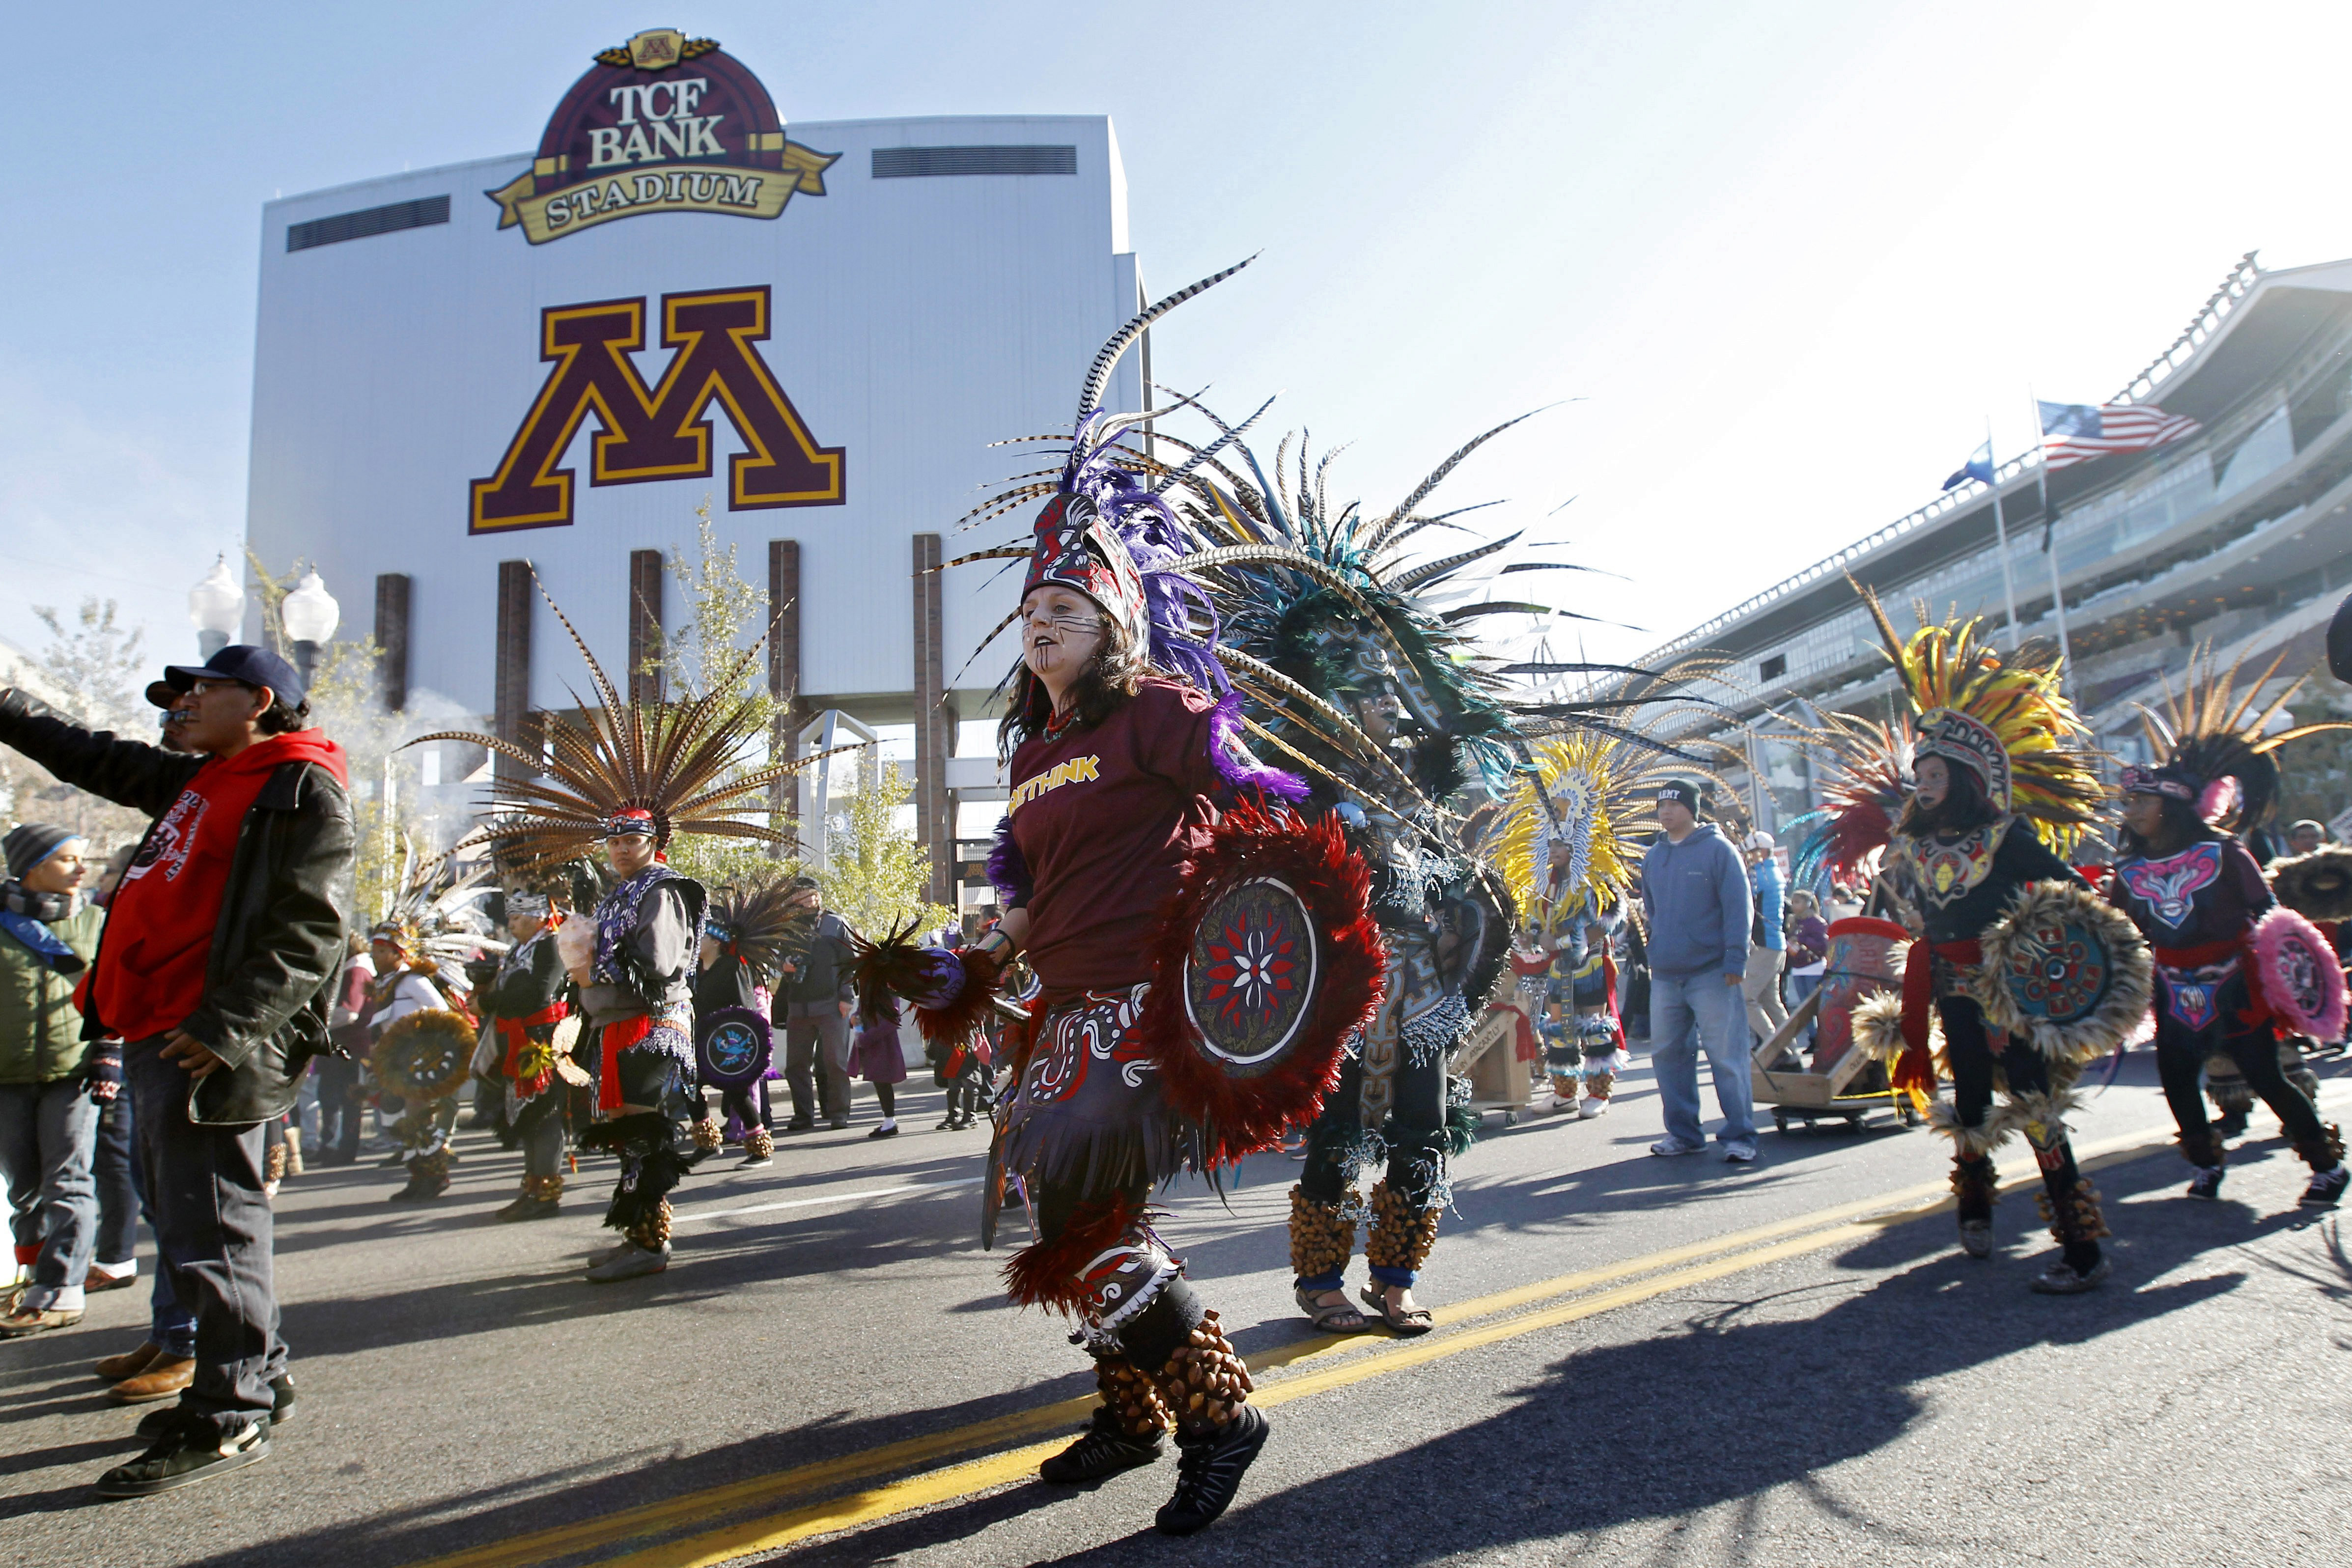 Protestors march outside TCF Bank Stadium before an NFL football game between the Minnesota Vikings and the Washington Redskins on Nov. 2, 2014, in Minneapolis. (Ann Heisenfelt—AP)